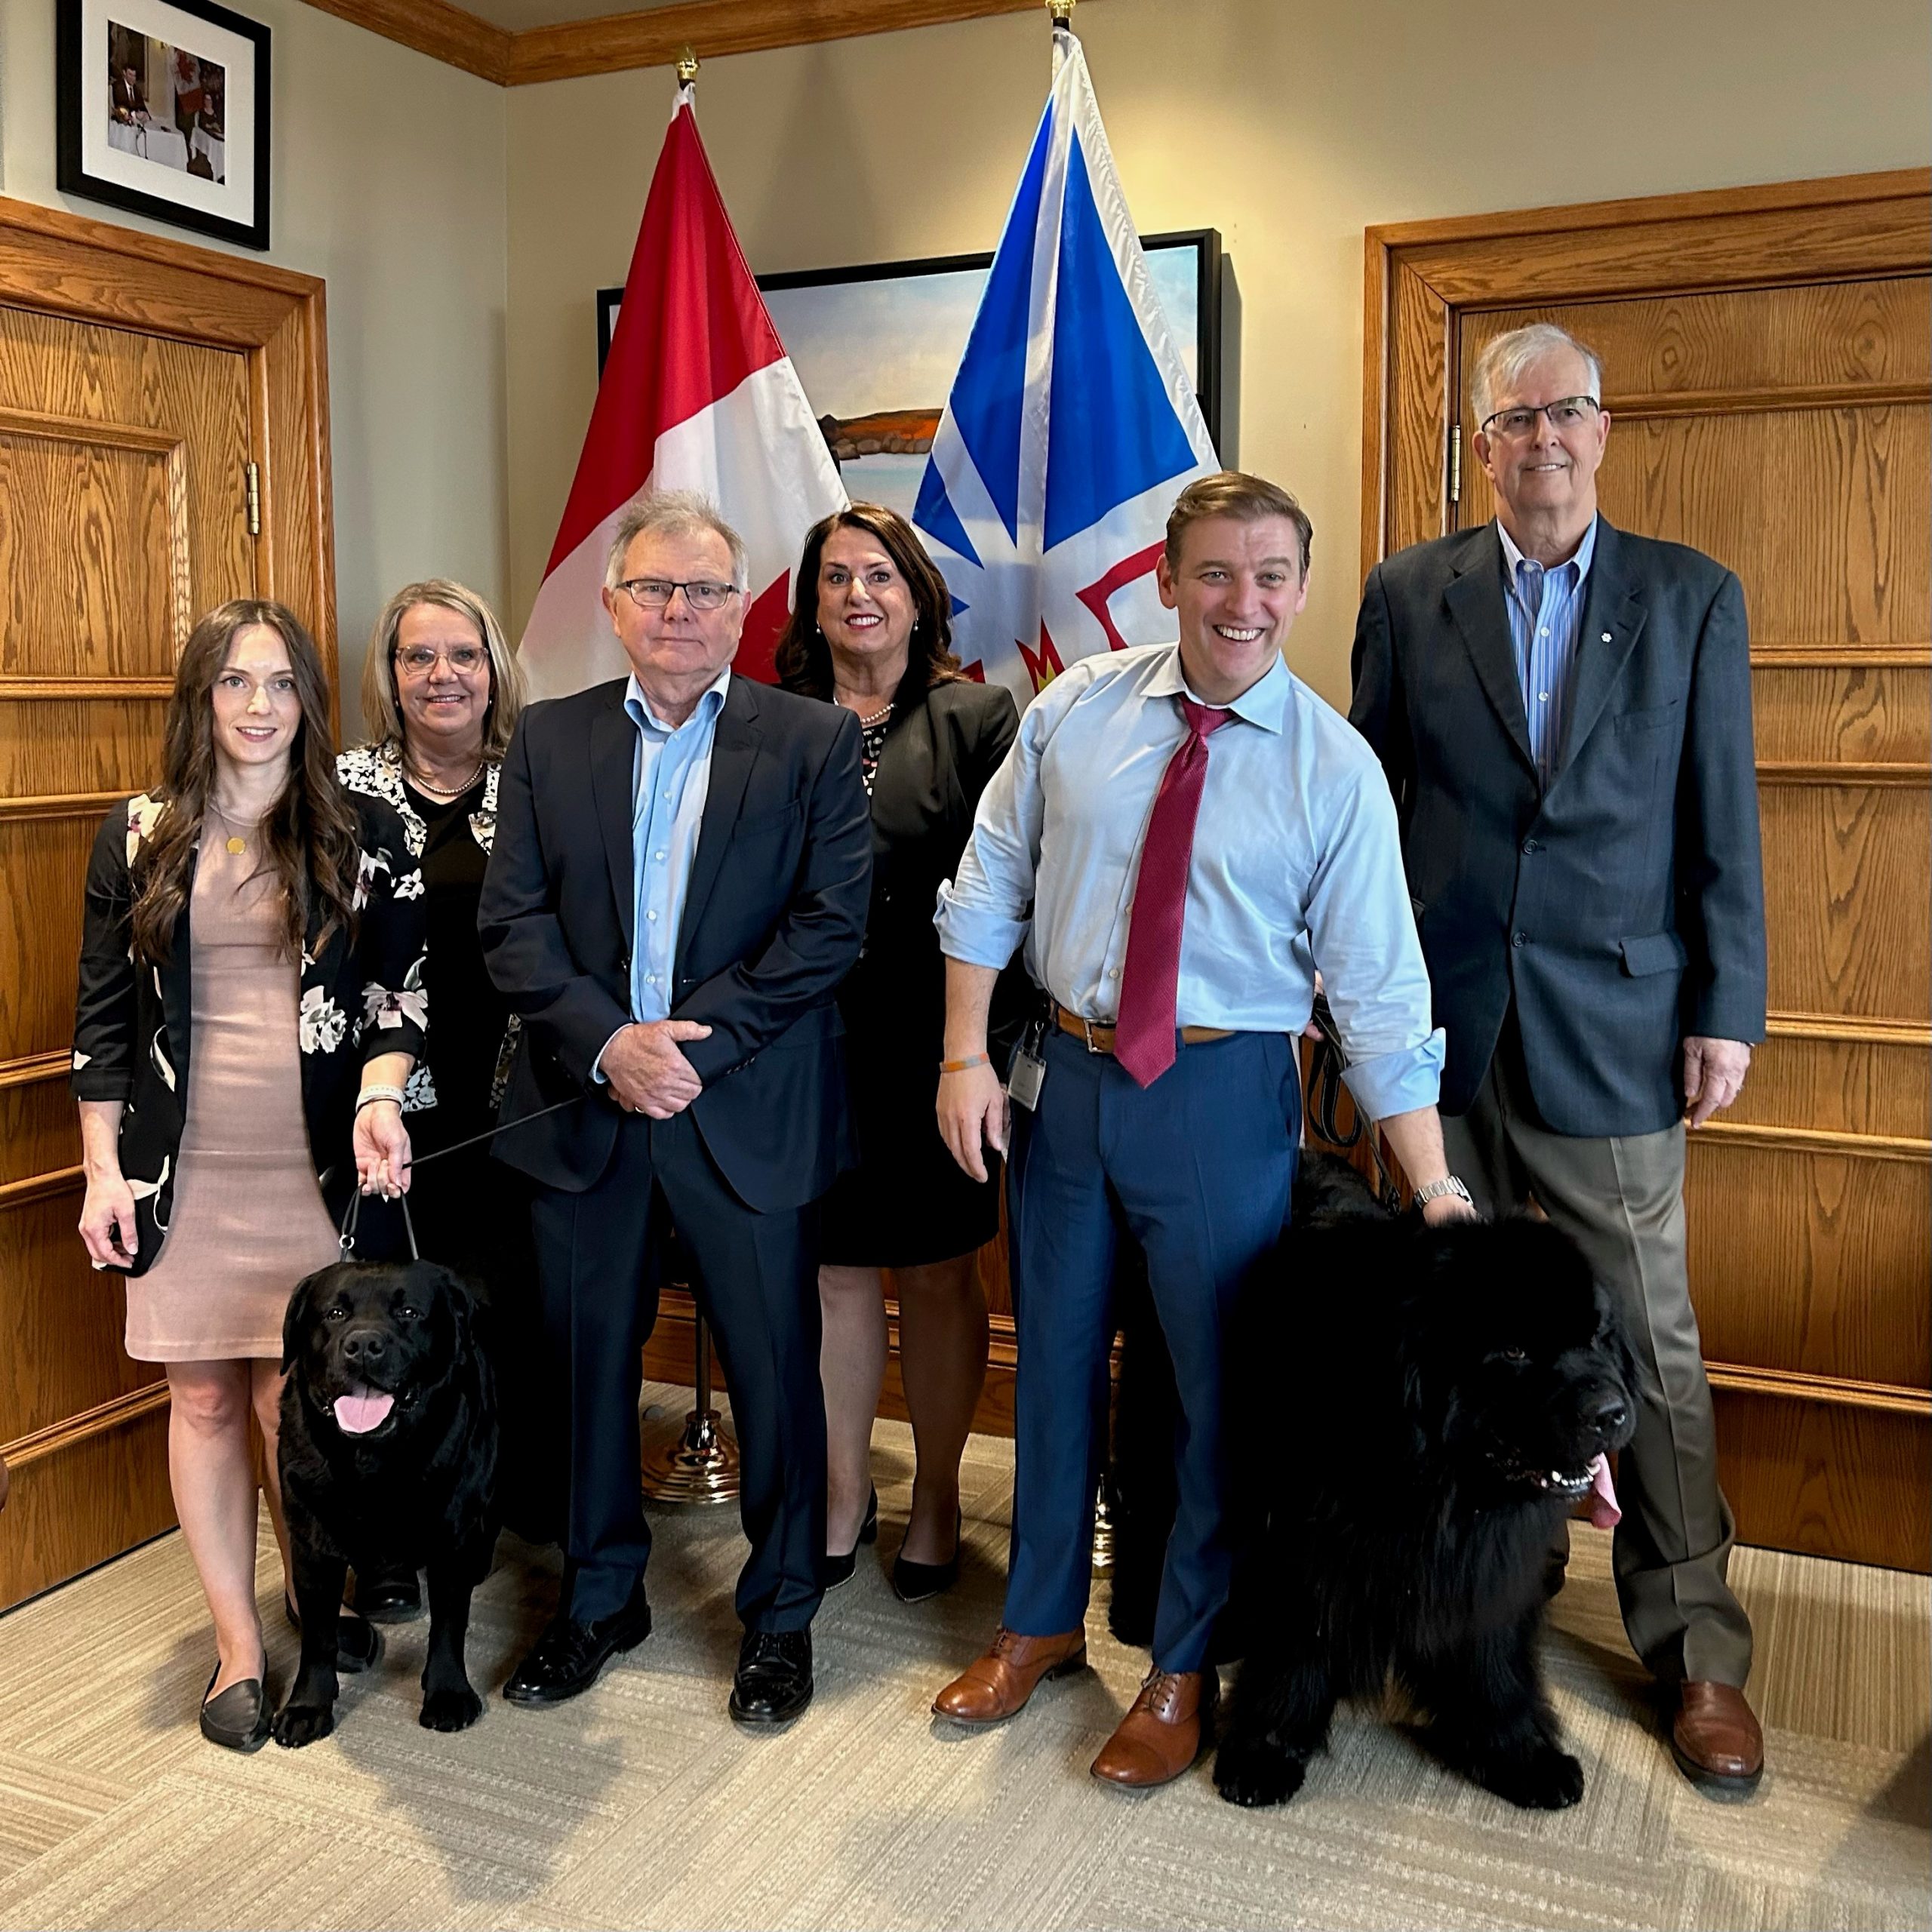 Beau, the Labrador Retriever, and Night, the Newfoundland dog, met with the Premier today. From left to right: Caitlin O’Brien-Dyke, Pamela Squires, Pat Coady, the Honourable Siobhan Coady, the Honourable Dr. Andrew Furey, and Rob Crosbie.